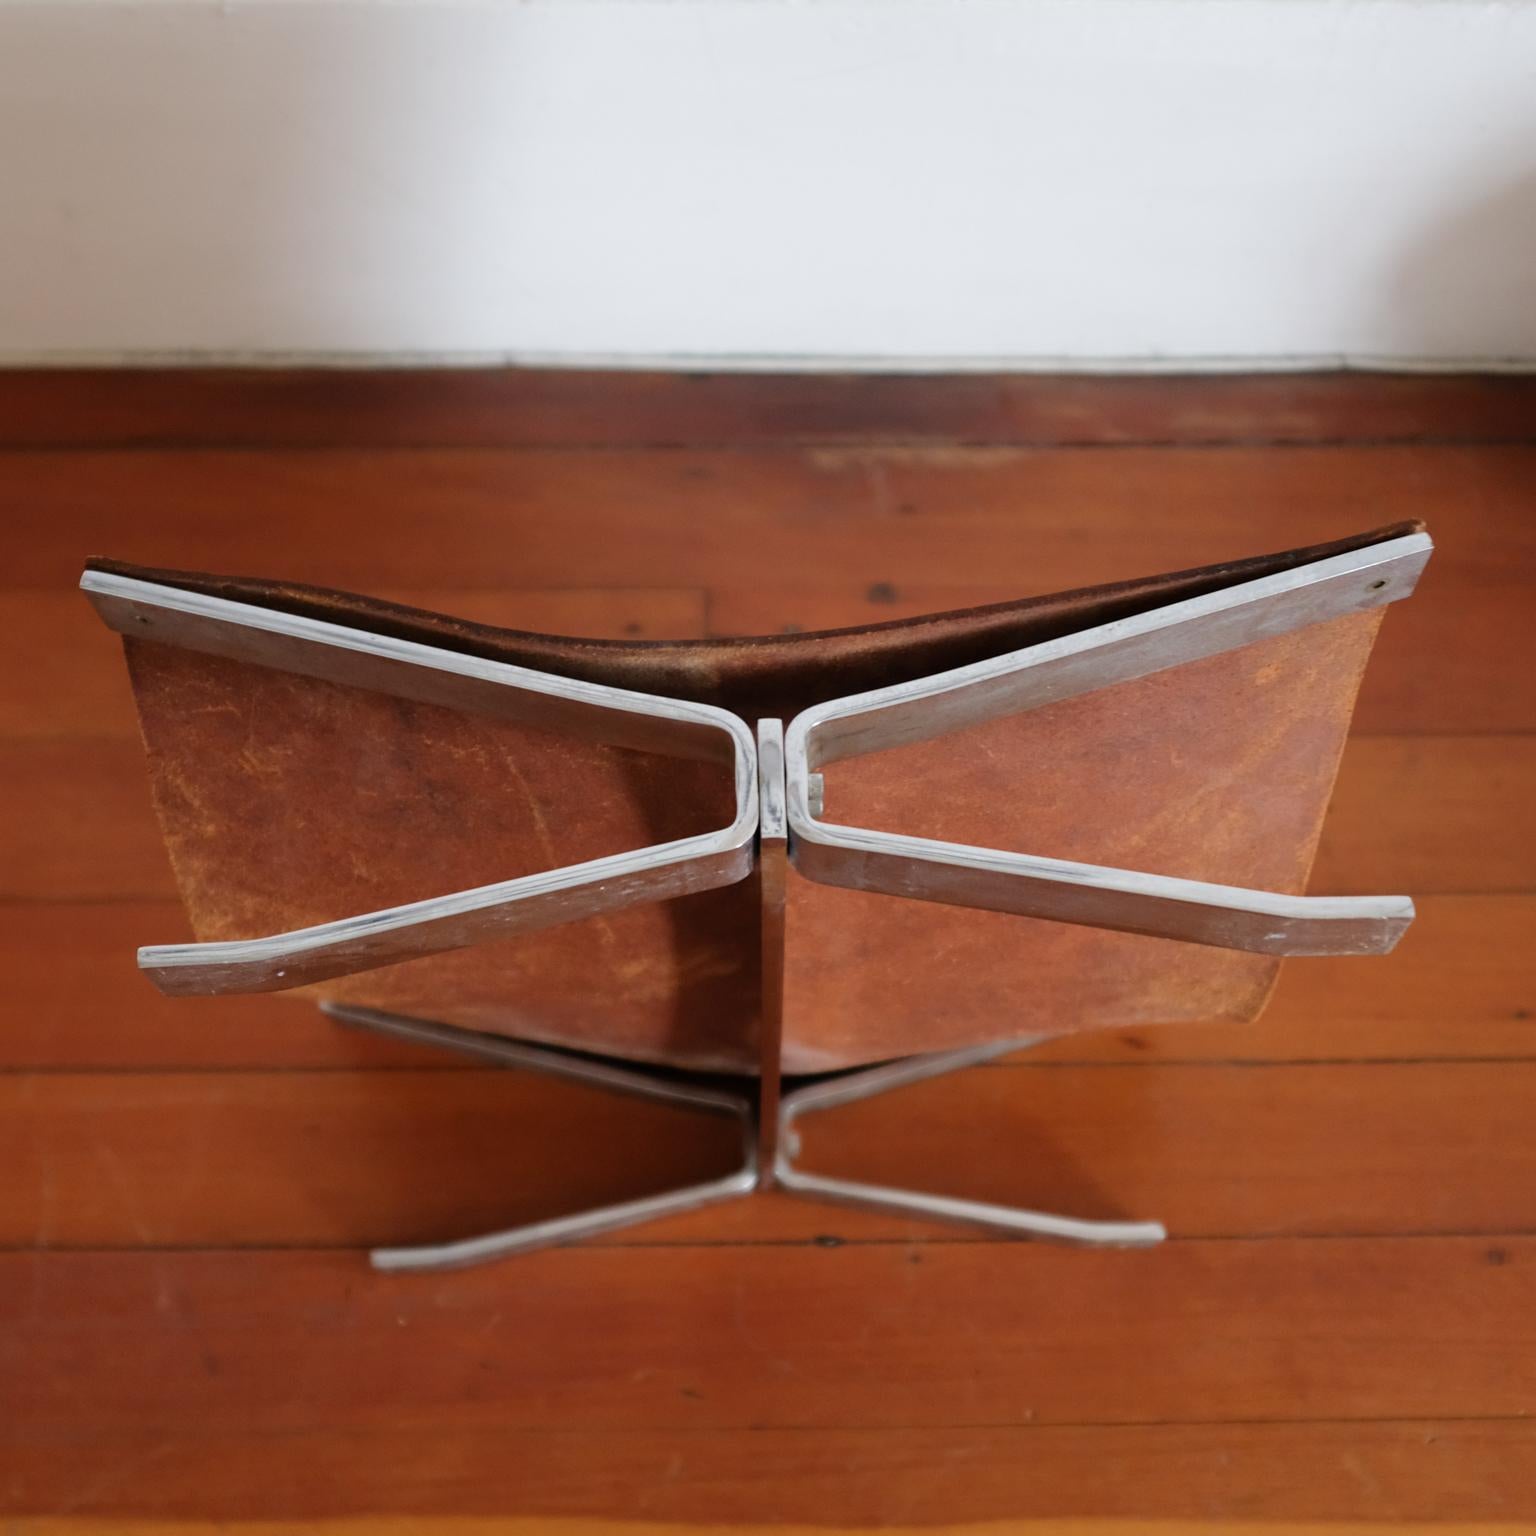 Steel Italian Leather Log Holder or Magazine Rack by Alessandro Albrizzi, 1960s